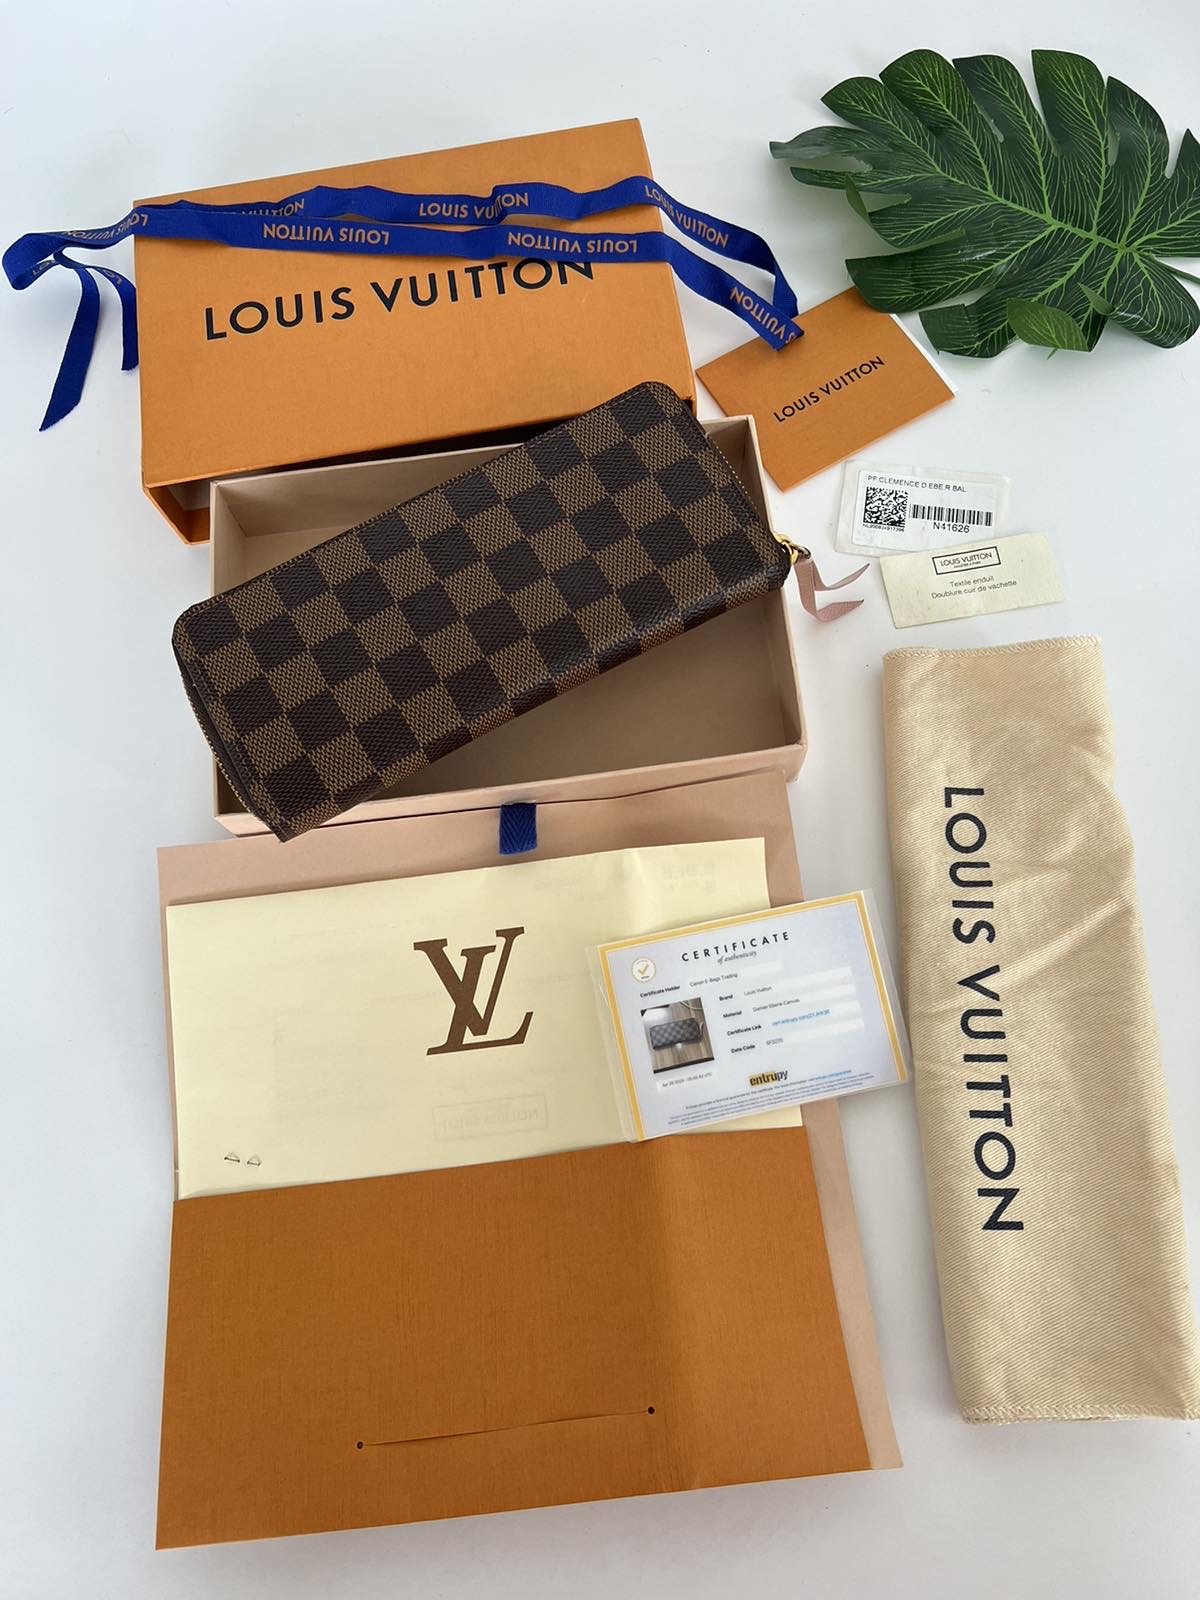 Louis Vuitton Damier Ebene Clemence Wallet Light Pink Interior. DC: SF3270.  Made in France. With care card, receipt, dustbag, ribbon, box & certificate  of authenticity from ENTRUPY ❤️ - Canon E-Bags Prime